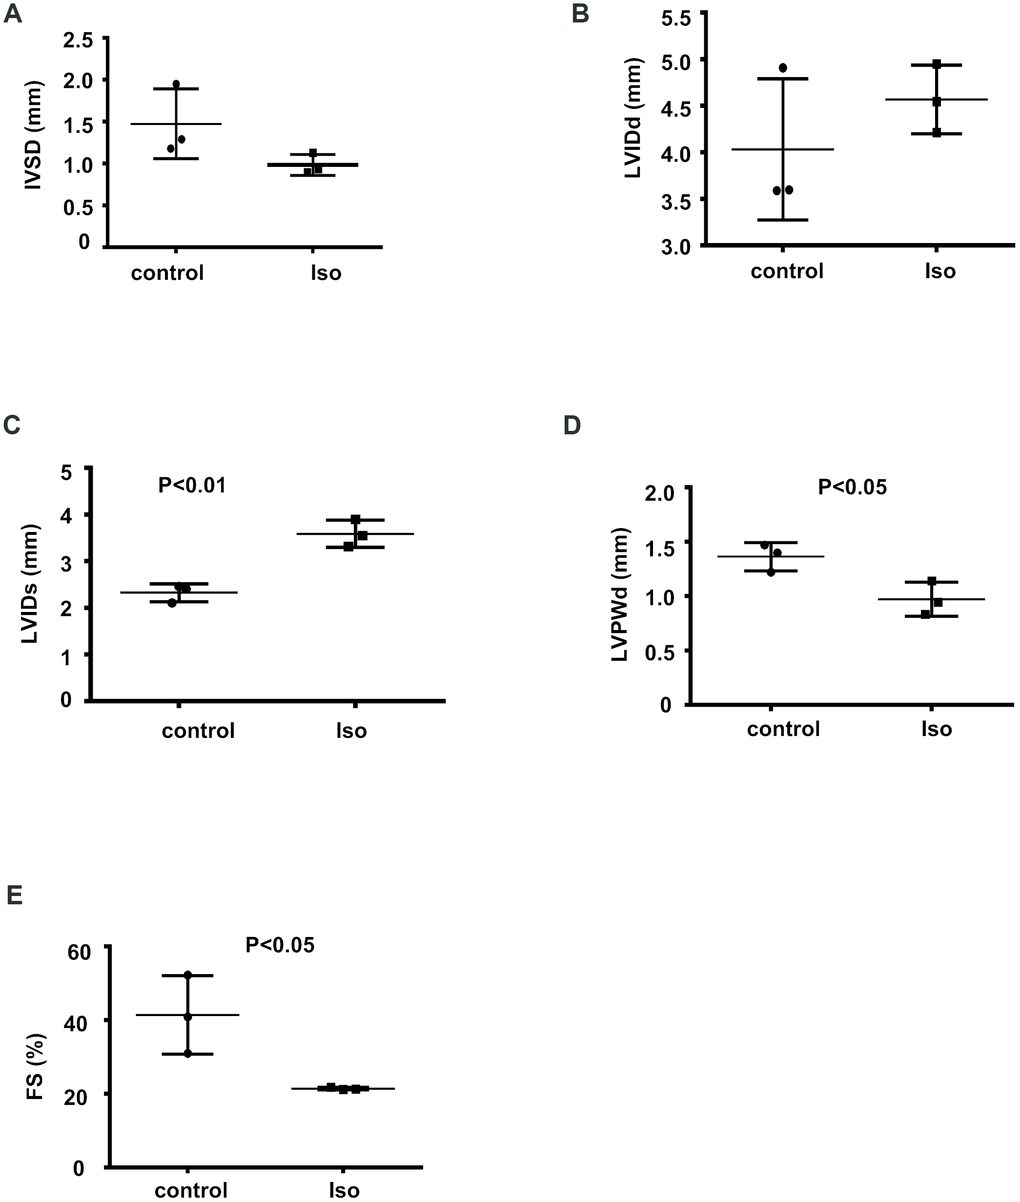 Isoproterenol treatment resulted in decreased cardiac function. Cardiac function was determined by echocardiography in 8-week-old mice infused with isoproterenol. The interventricular septum thickness at end-diastole (IVSD) (A) end-diastolic and end-systolic left ventricular internal diameter (LVIDd and LVIDs) (B, C) end-diastolic left ventricular posterior wall thickness (LVPWd) (D) and fractional shortening (FS) (E) were determined from the M-mode images. ctr: control, Iso: isoproterenol. Data are the mean ± SEM. n= 3 per group.